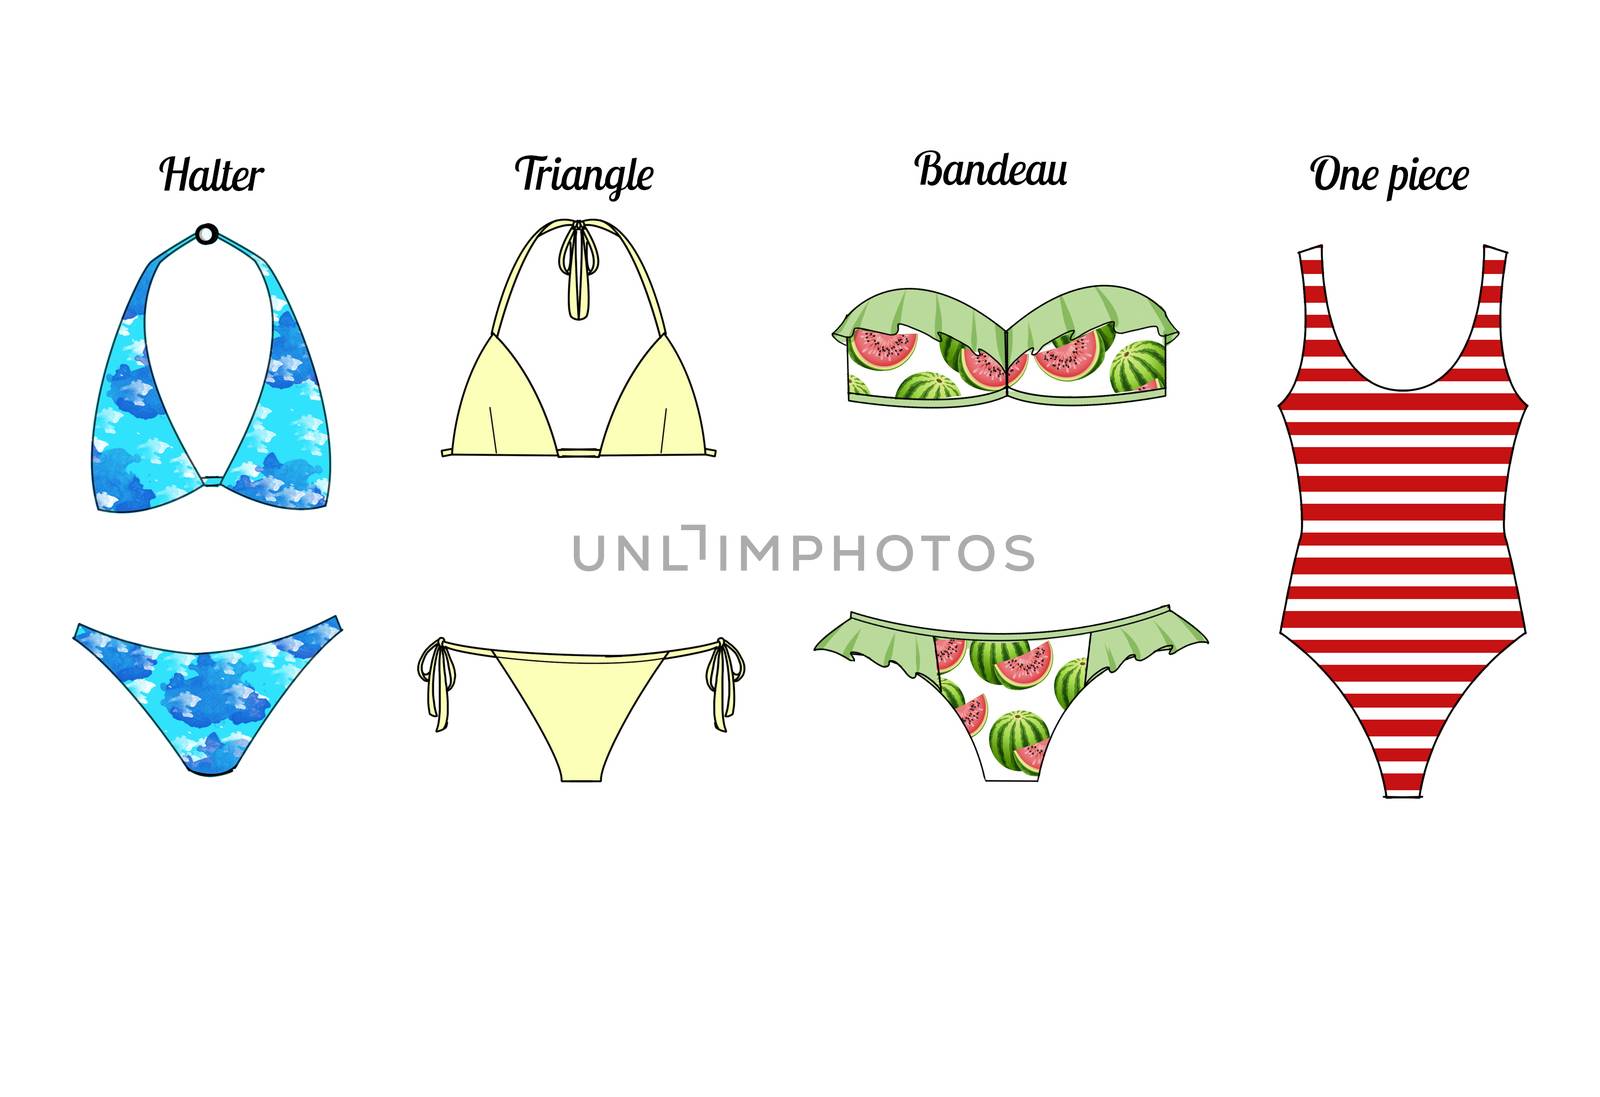 Fashion Illustration - different type of bathsuits by GGillustrations